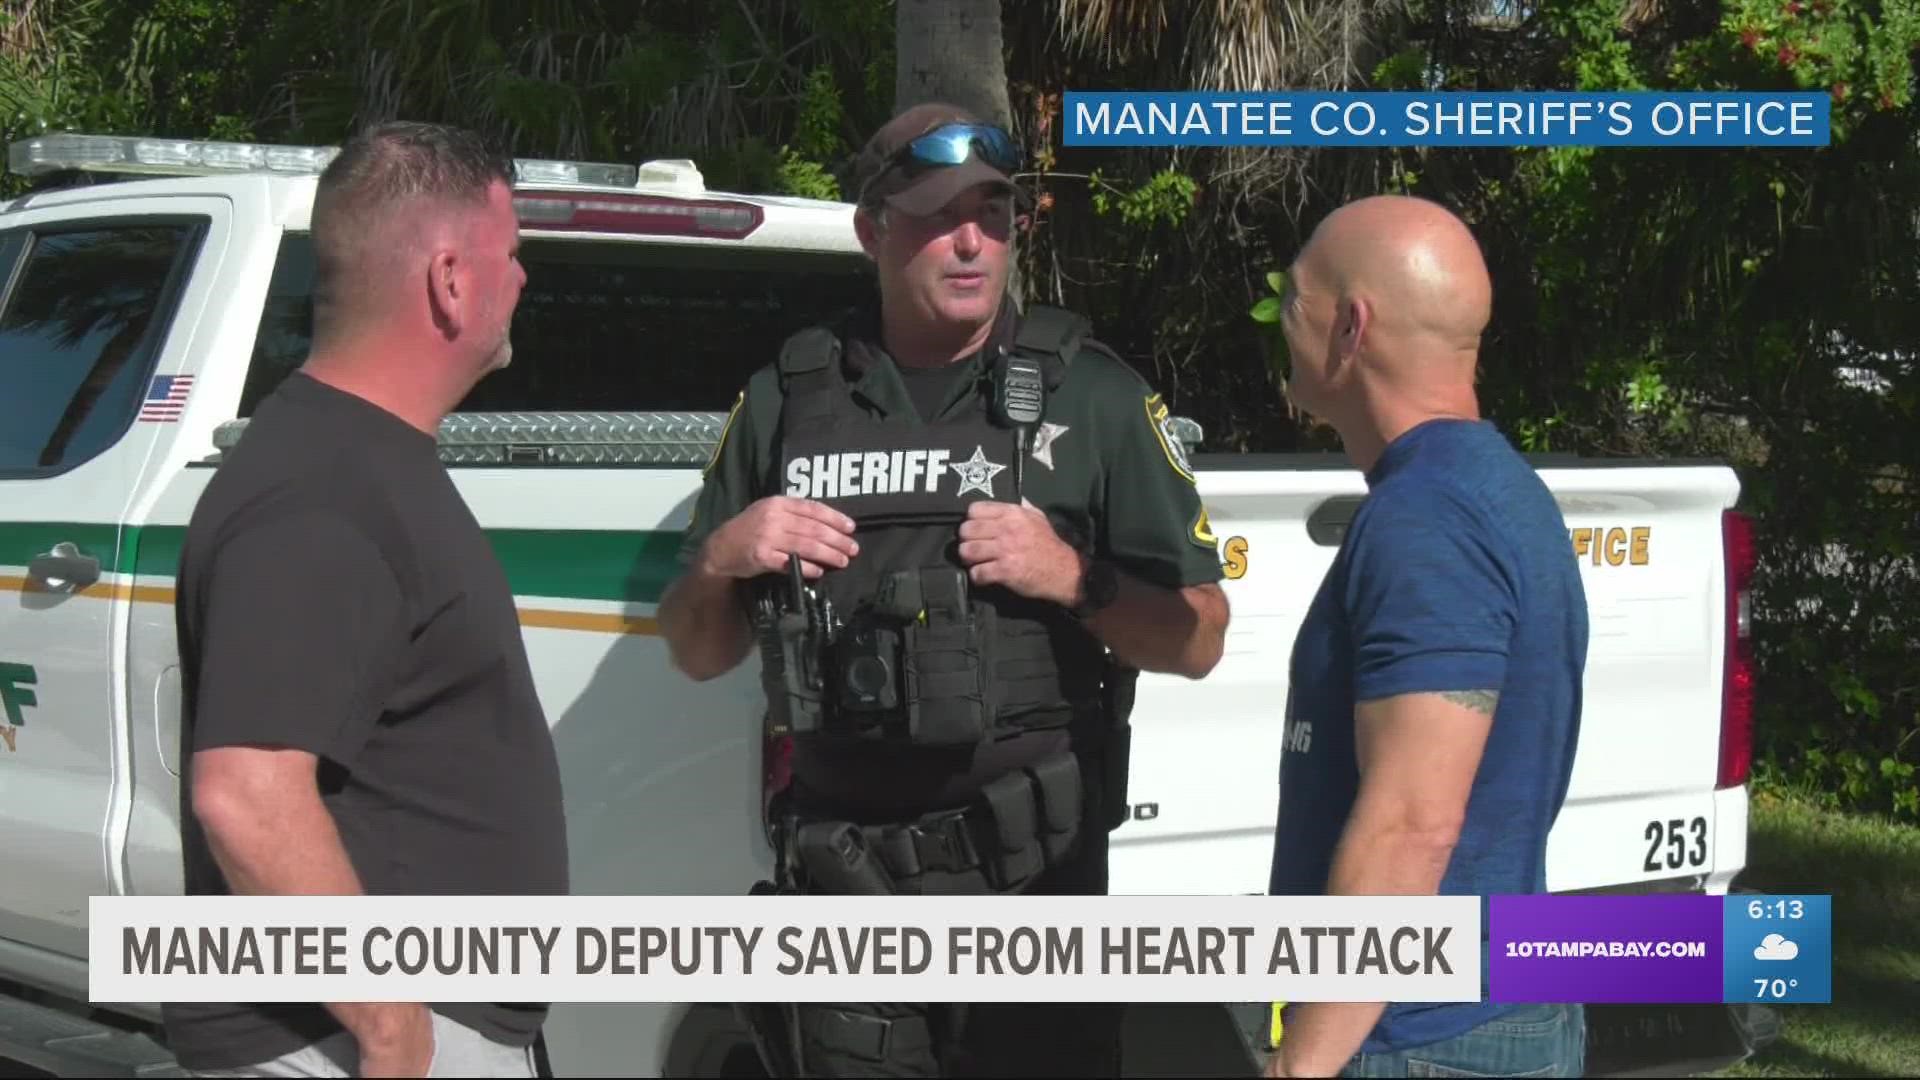 According to his doctors, Deputy Brett Getman suffered an anterior STEMI (ST-segment elevation myocardial infarction), commonly called a Widowmaker Heart Attack.